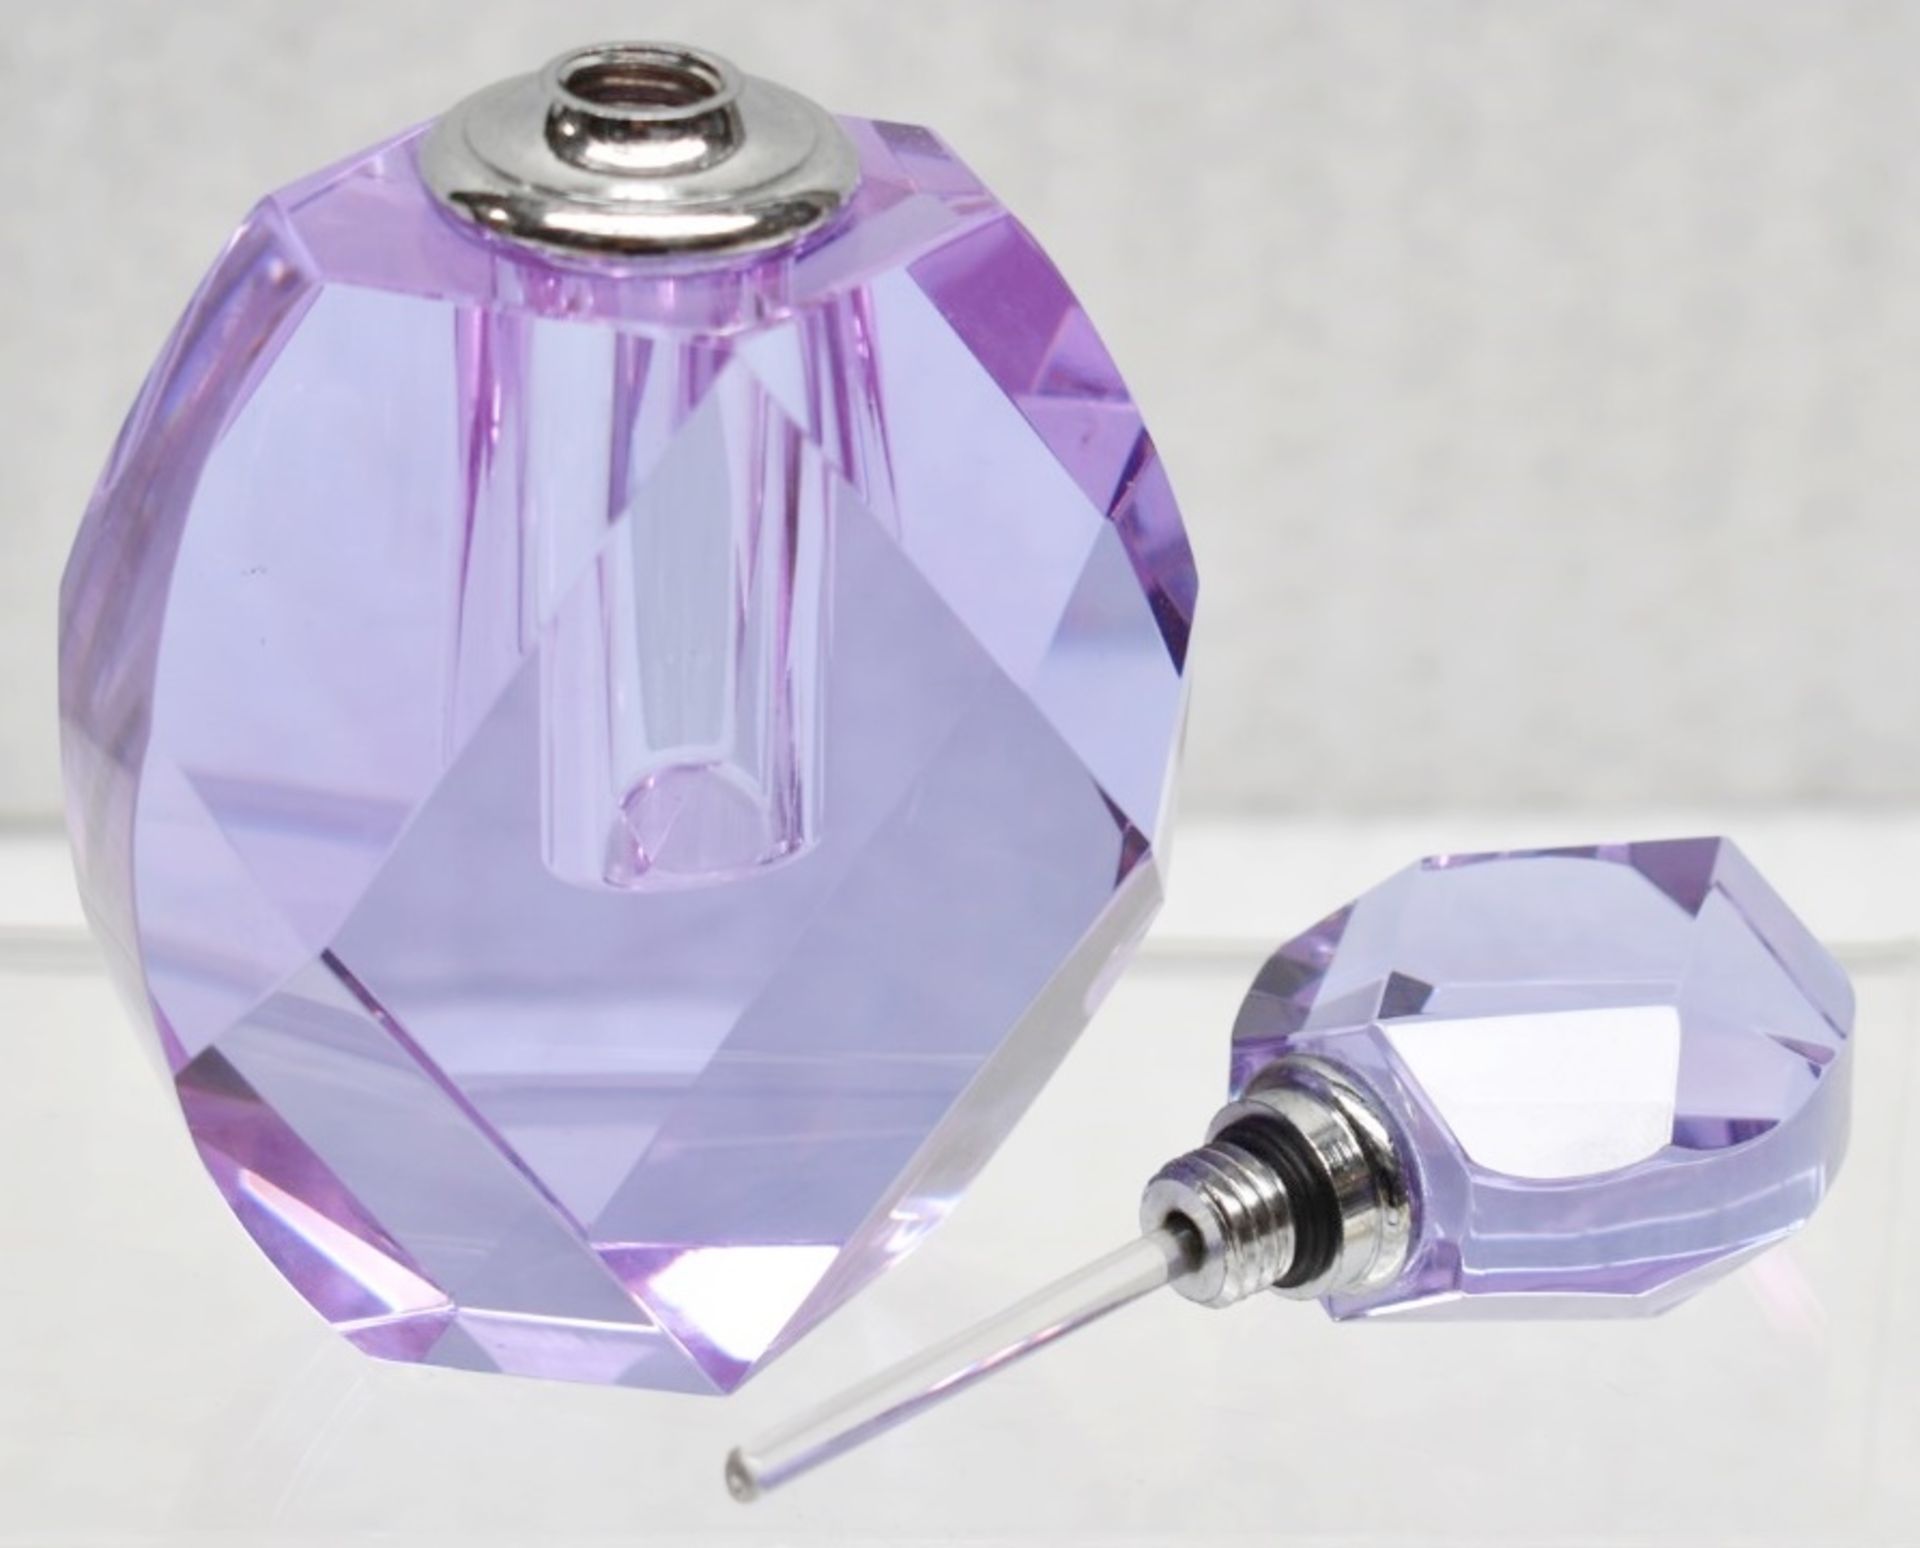 2 x Vintage-Style Cut Glass Perfume Bottles In Purple / Pink - Image 3 of 5